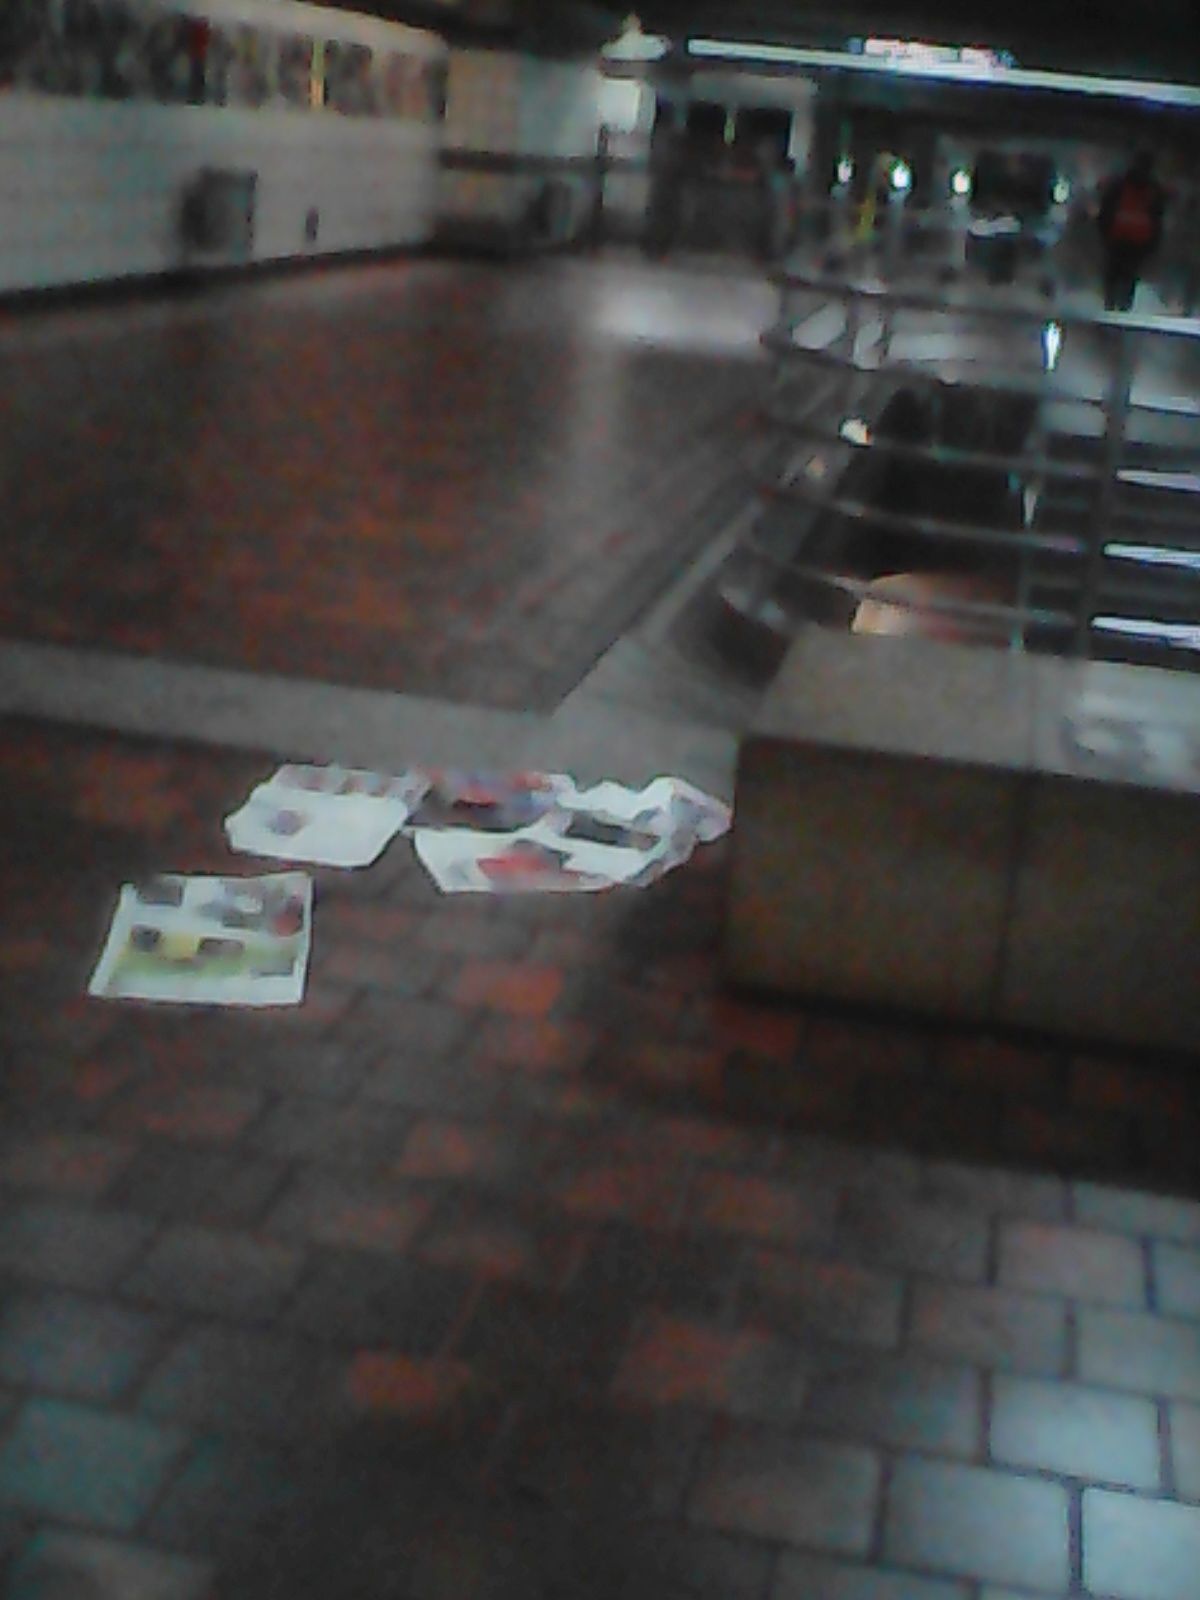 the news paper someone place over the water after they couldn't find Metro worker to clean up